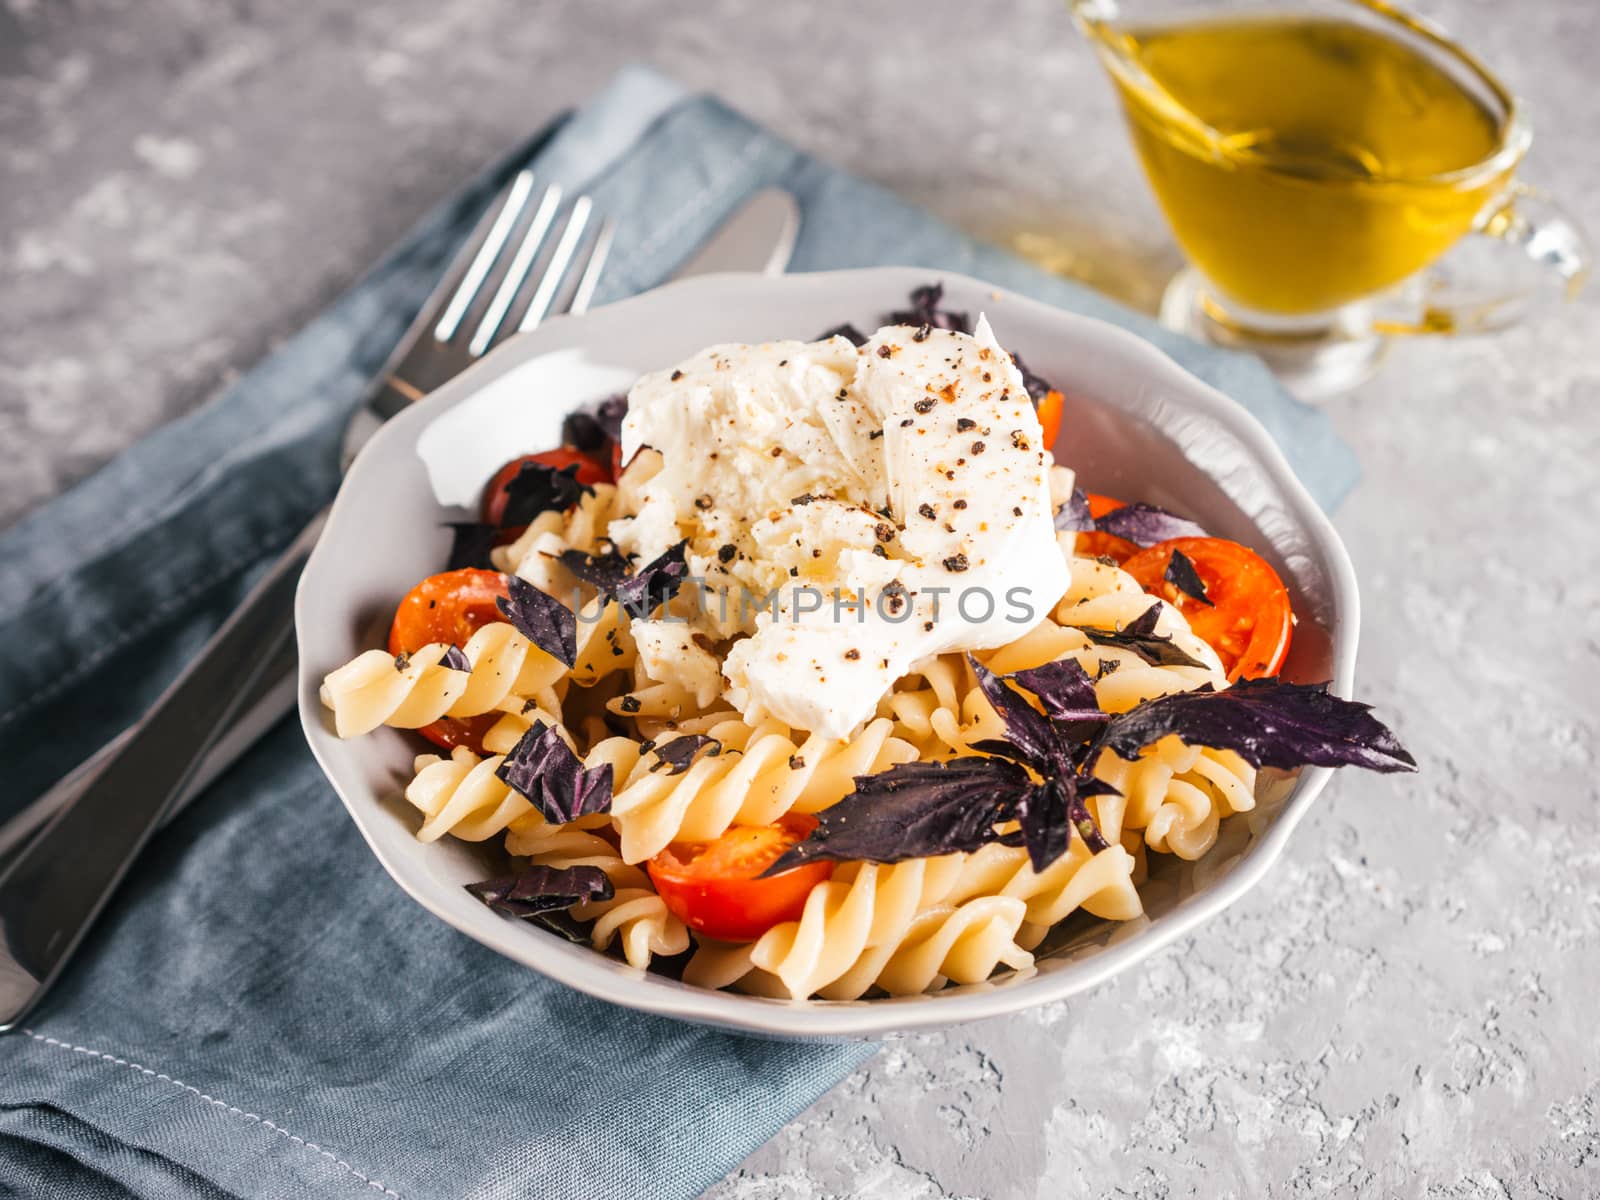 Tasty italian fusilli pasta with cherry, mozarella or buratta cheese and fresh basil. Dish with pasta on gray concrete background. Copy space. Healthy food concept and recipe idea.